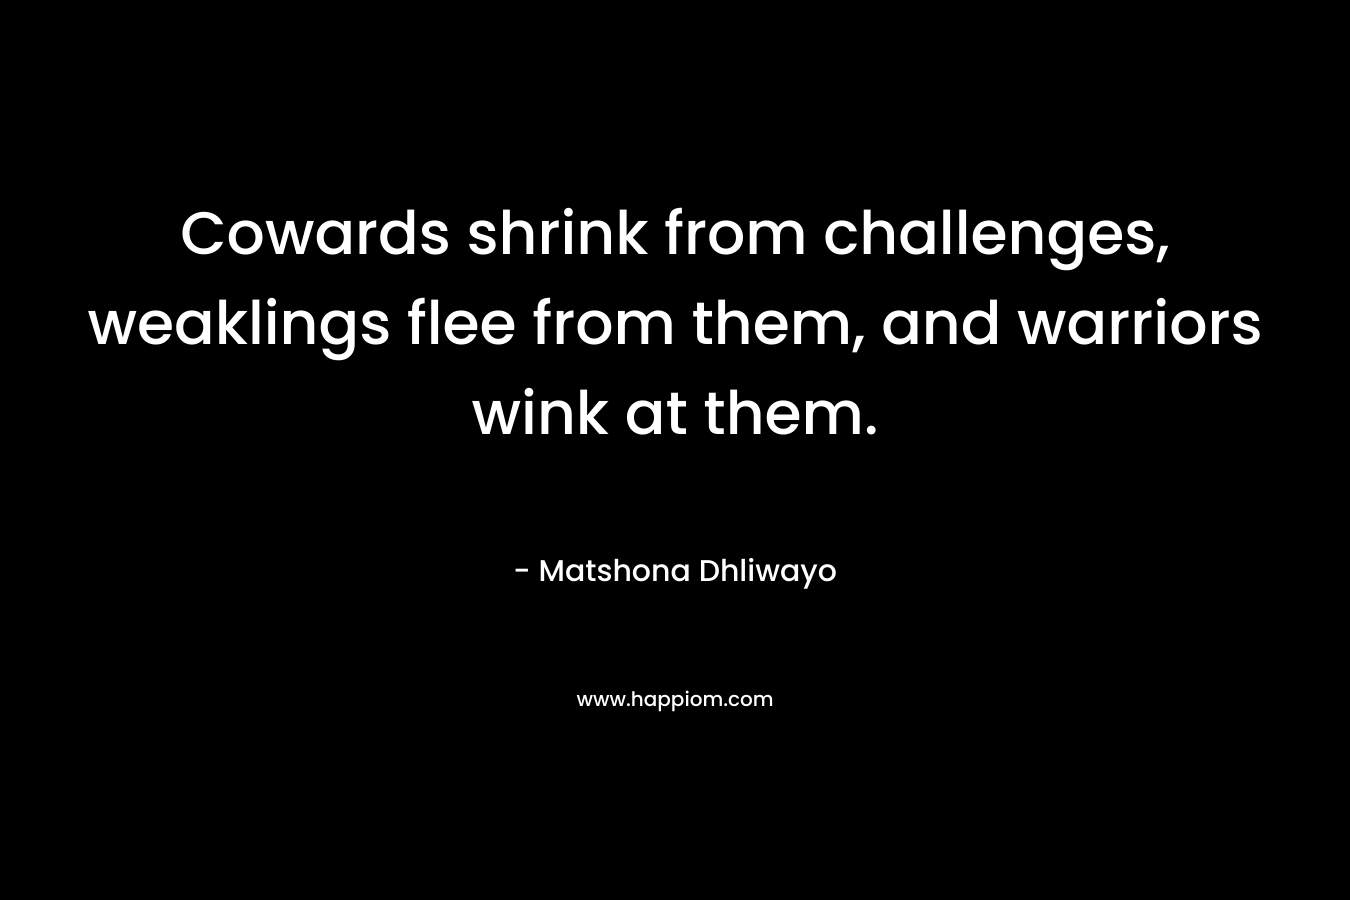 Cowards shrink from challenges, weaklings flee from them, and warriors wink at them. – Matshona Dhliwayo